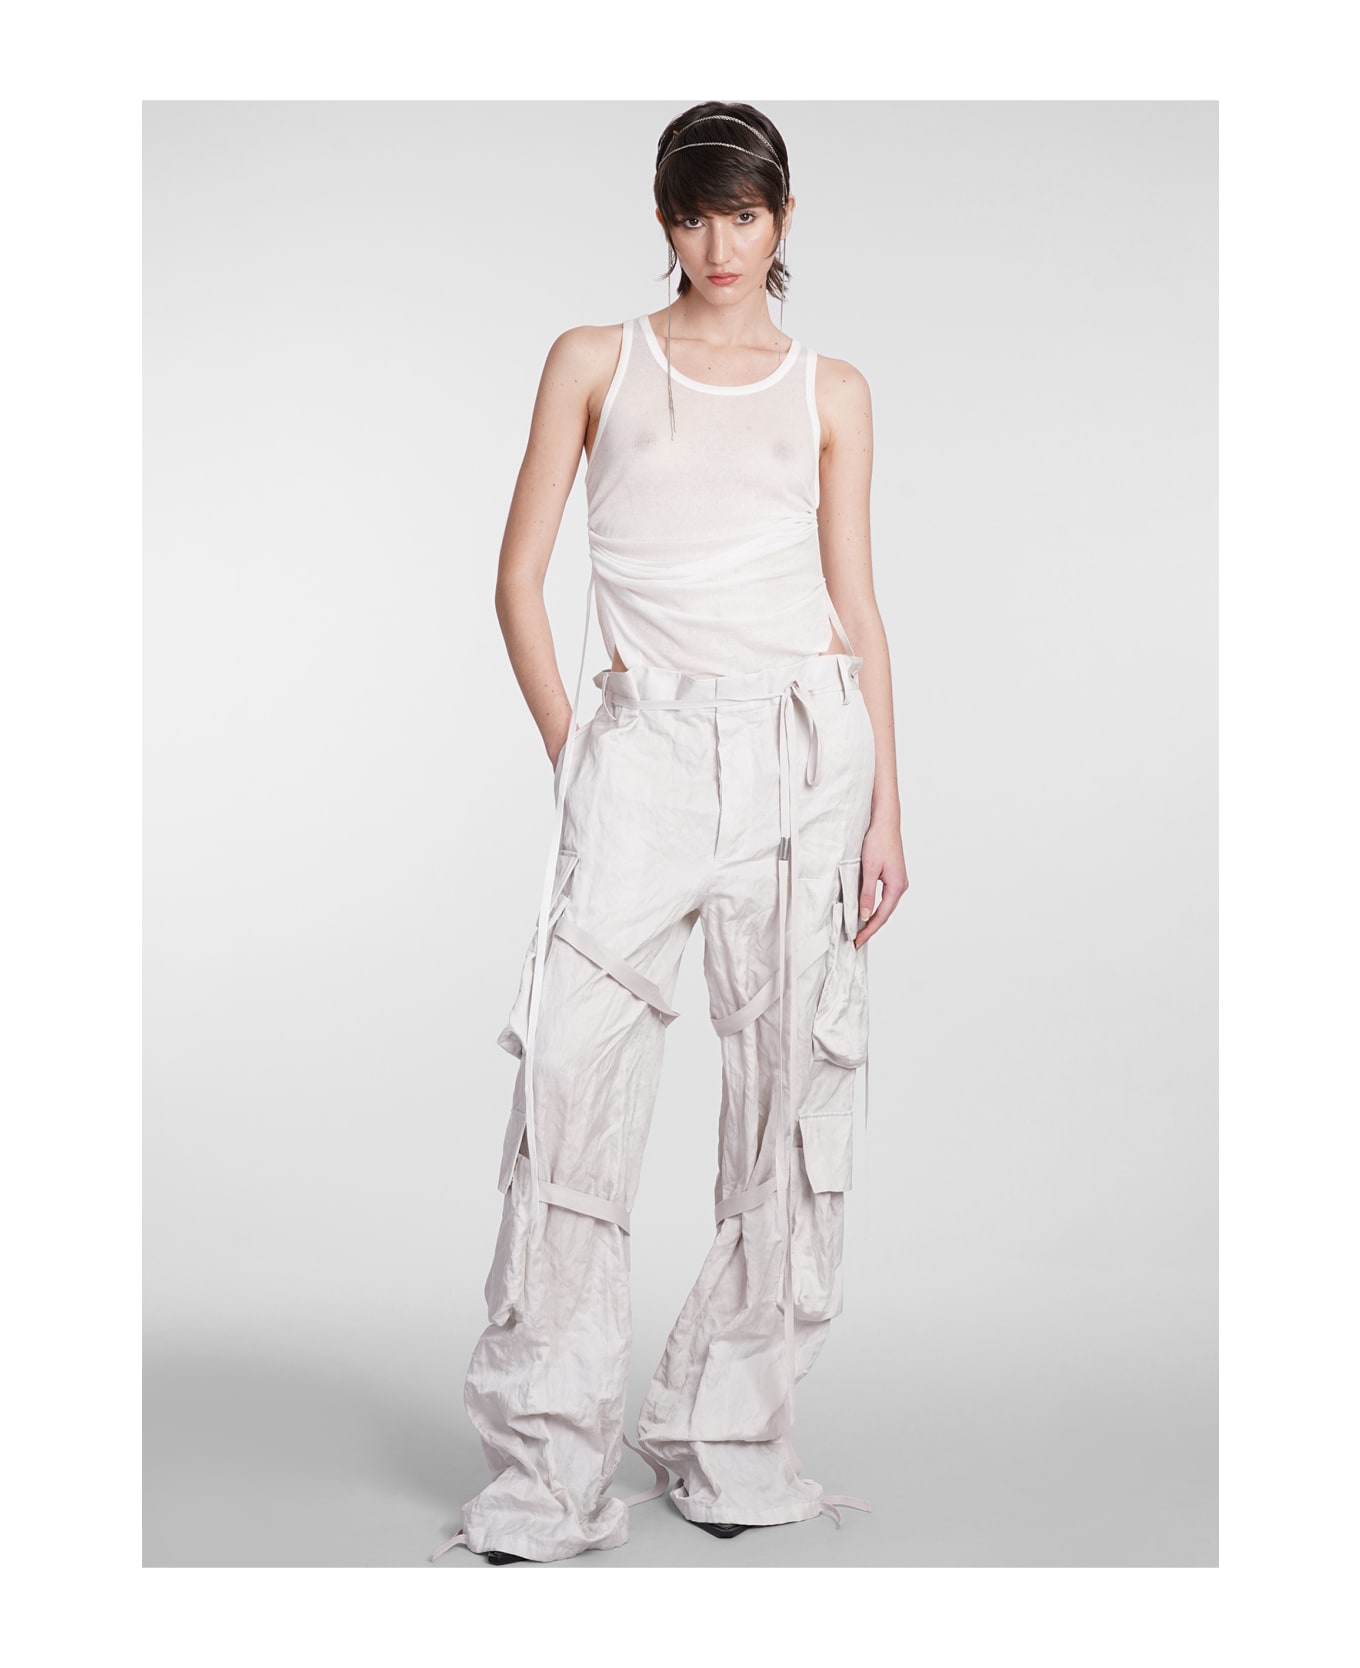 Ann Demeulemeester Tank Top In White Cotton - white